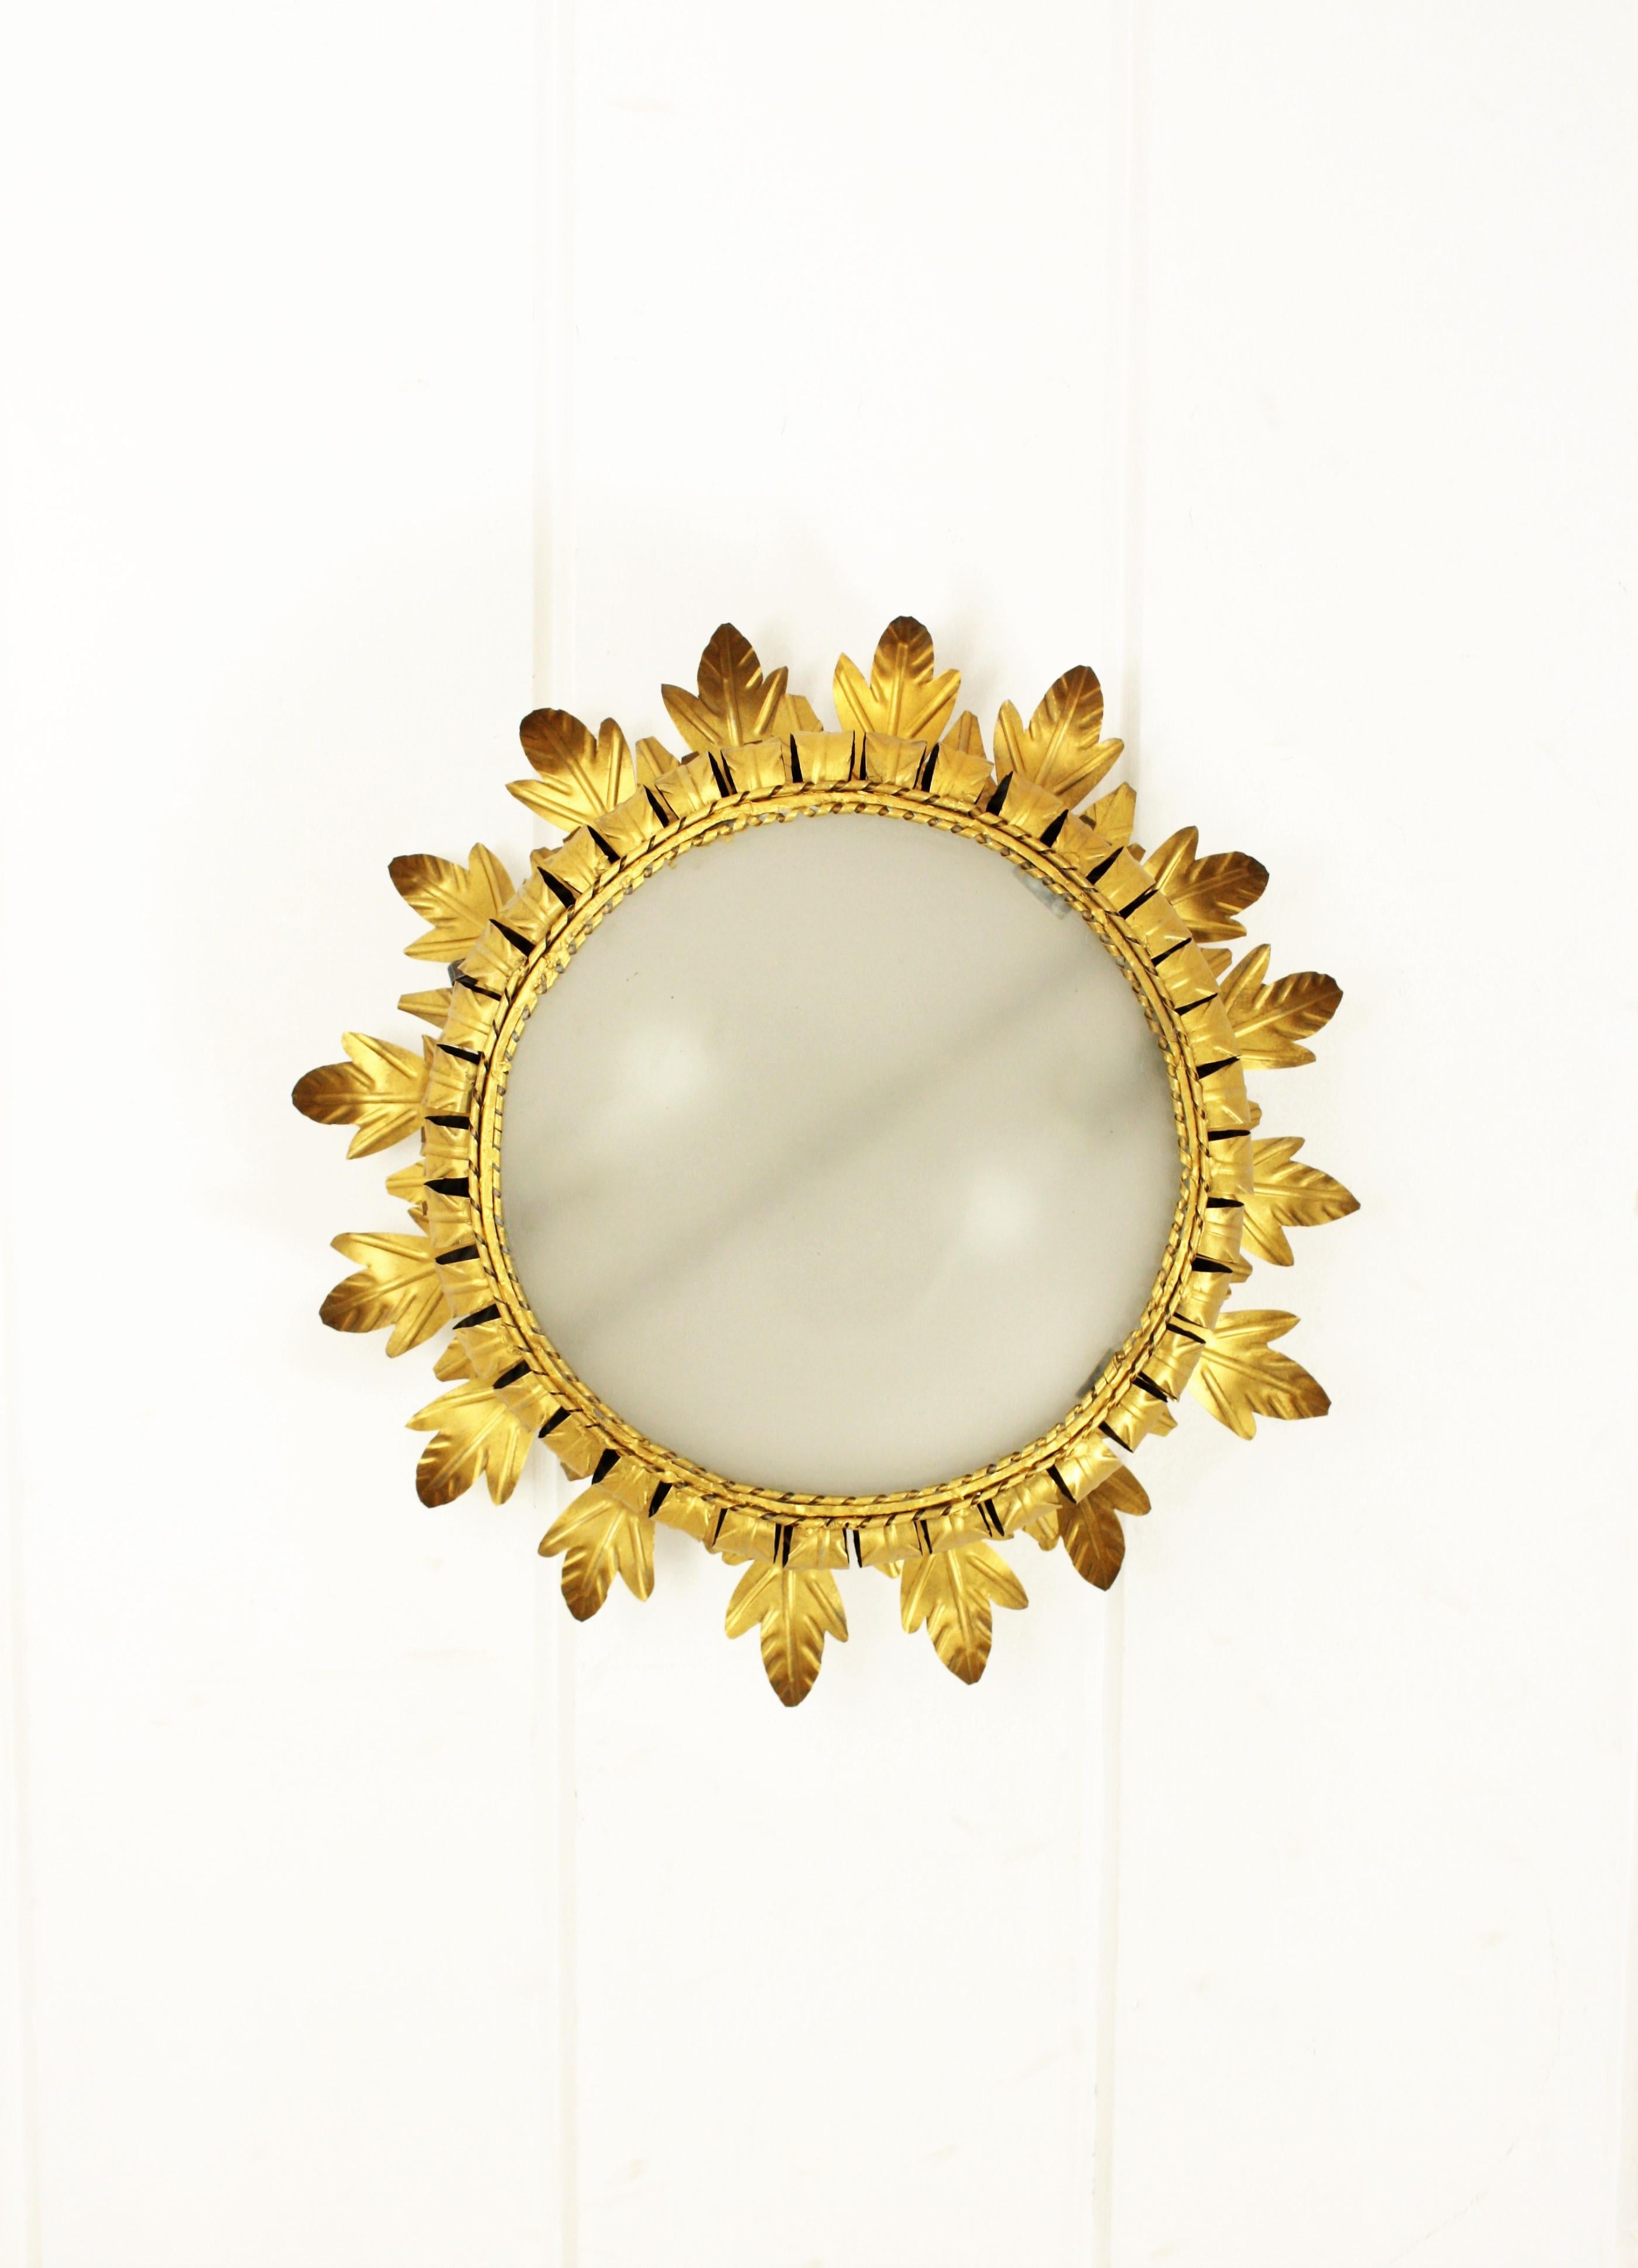 Sunburst Crown Large Ceiling Light Fixture in Gilt Metal and Frosted Glass 4